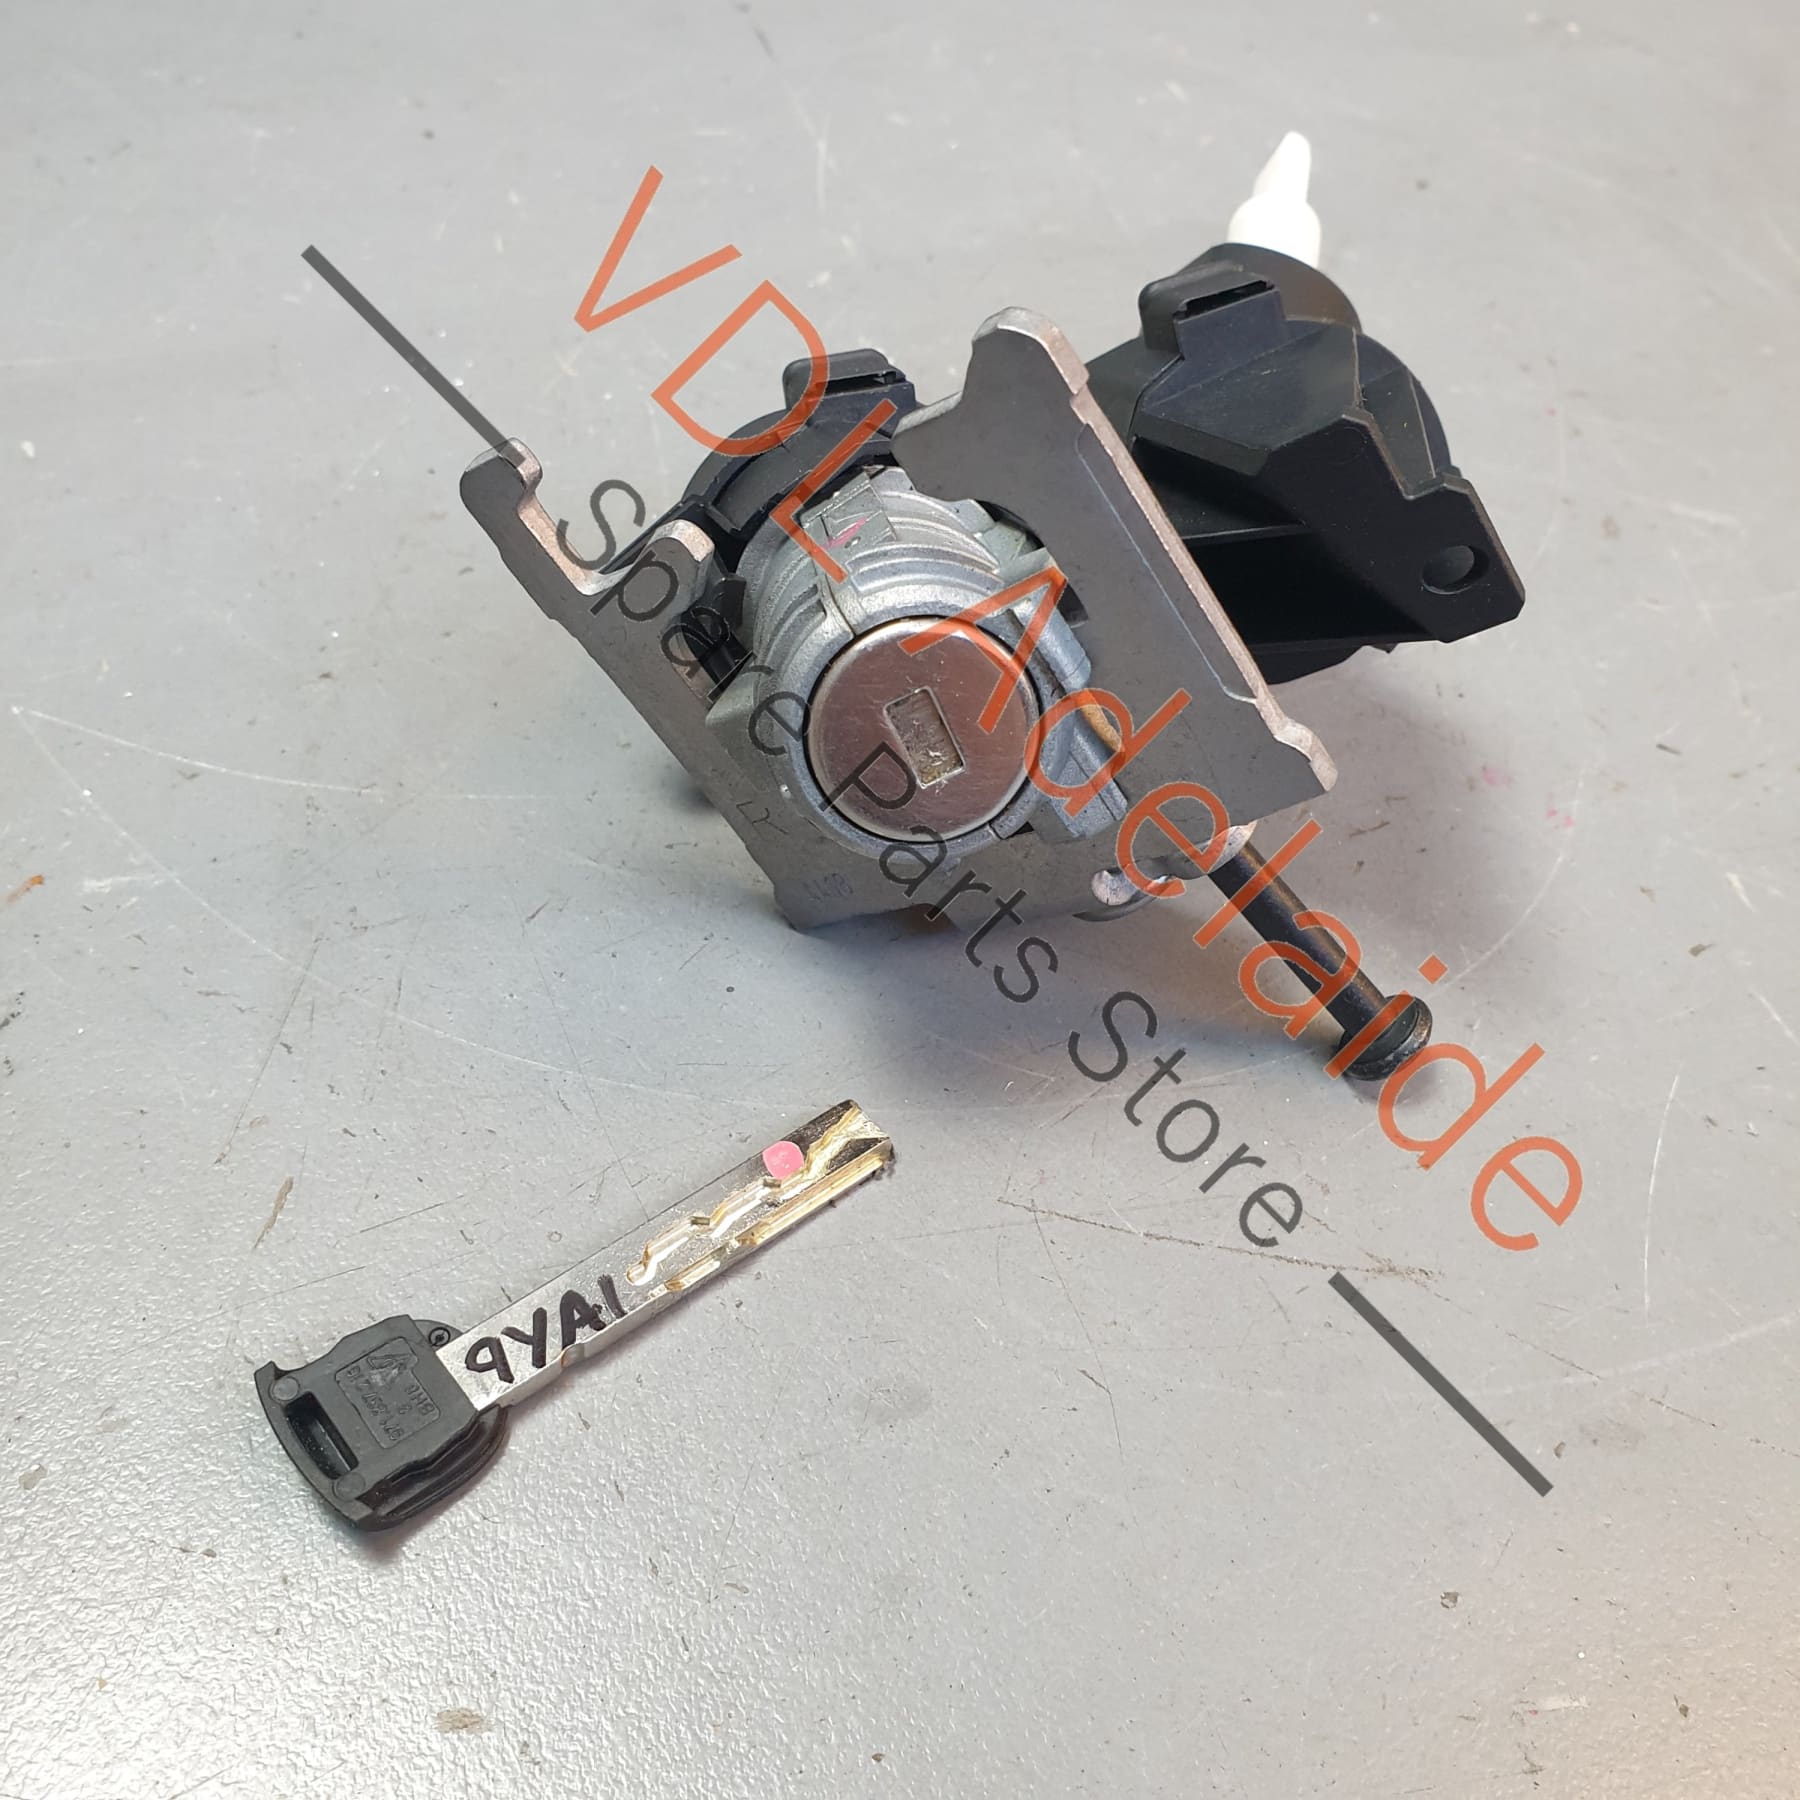    Porsche Cayenne E3 9YA 9YB Front Right Drivers Side Door Lock with matching blade key